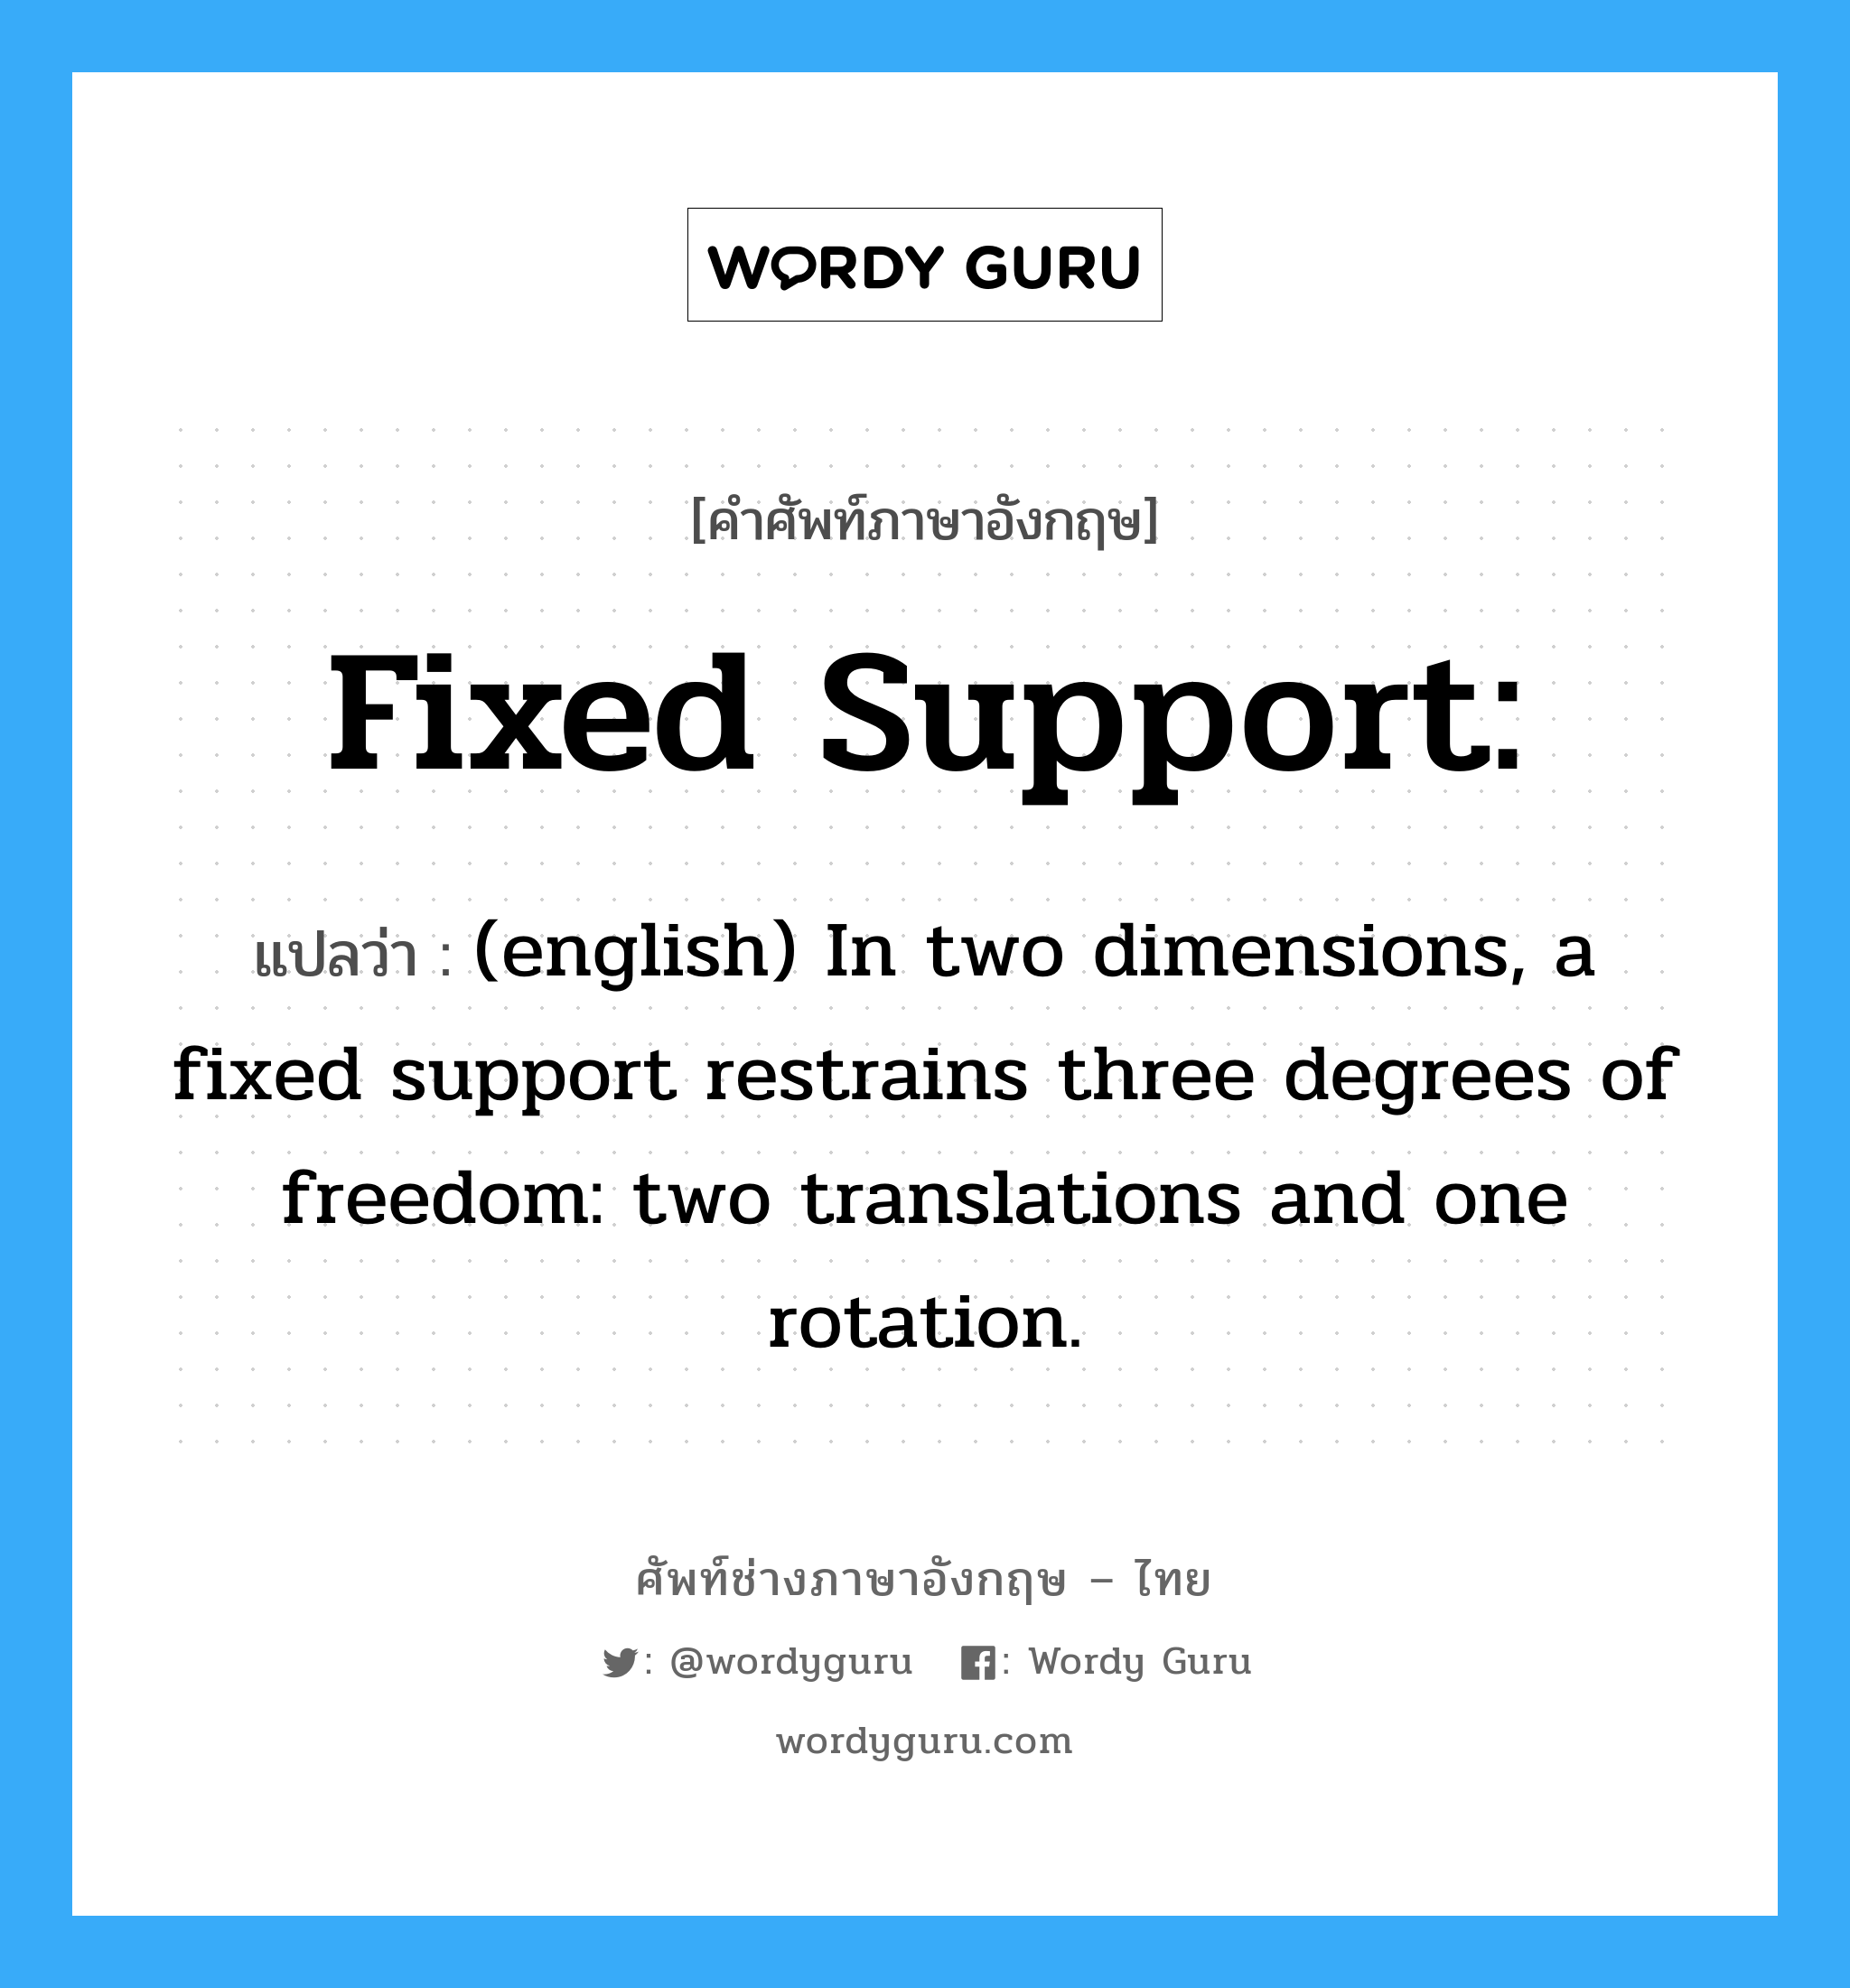 (english) In two dimensions, a fixed support restrains three degrees of freedom: two translations and one rotation. ภาษาอังกฤษ?, คำศัพท์ช่างภาษาอังกฤษ - ไทย (english) In two dimensions, a fixed support restrains three degrees of freedom: two translations and one rotation. คำศัพท์ภาษาอังกฤษ (english) In two dimensions, a fixed support restrains three degrees of freedom: two translations and one rotation. แปลว่า Fixed support: